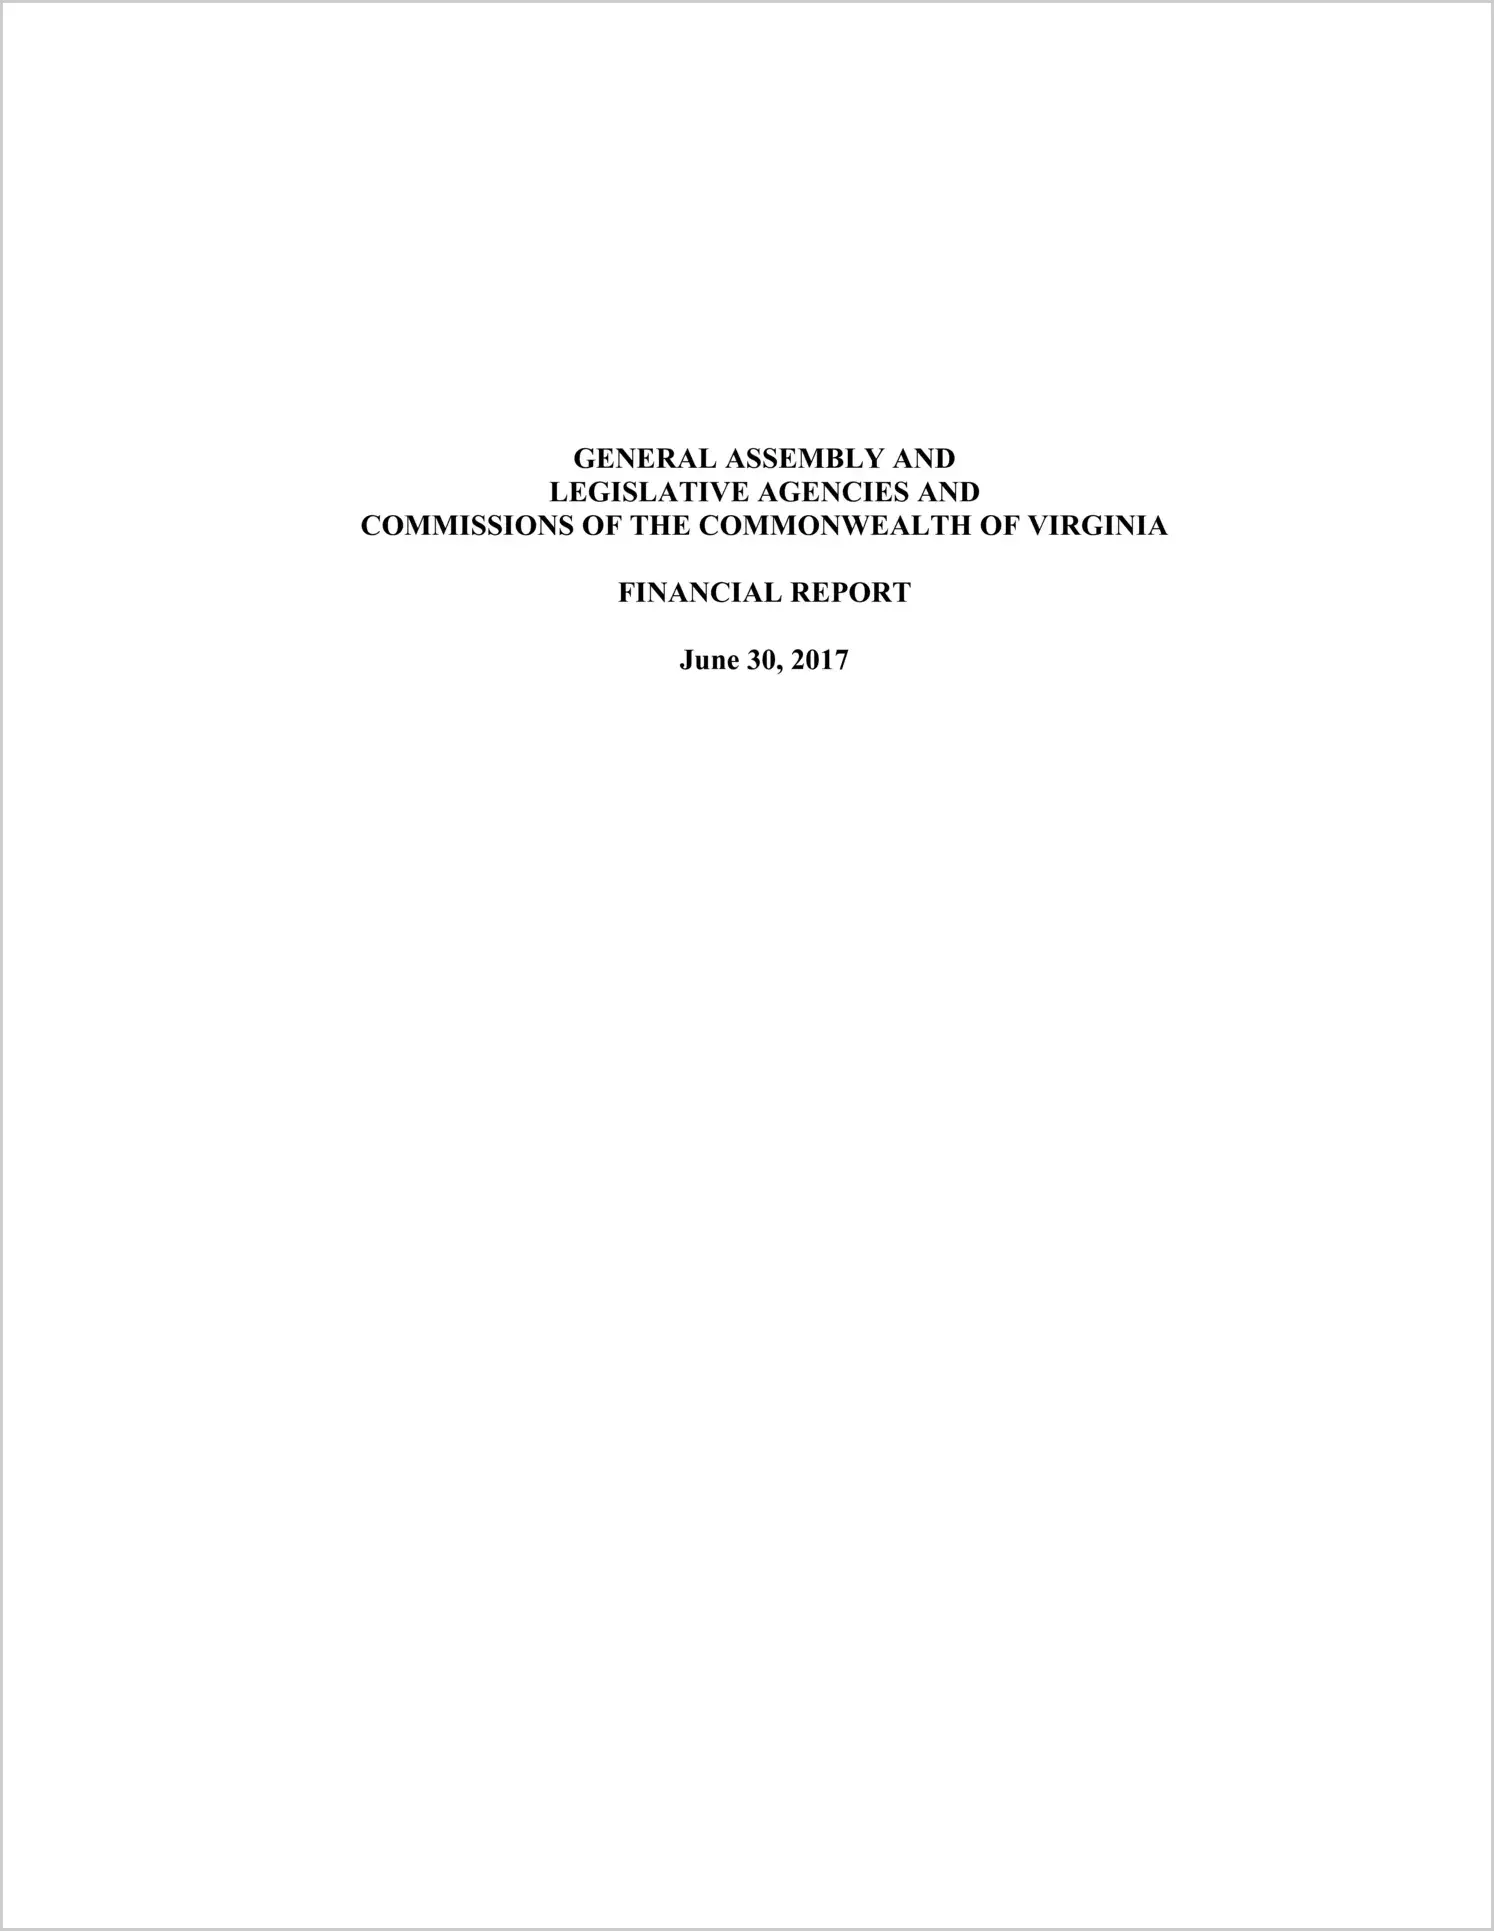 General Assembly and Legislative Agencies and Commissions of the Commonwealth of Virginia Financial Report for the Fiscal Year ended June 30, 2017